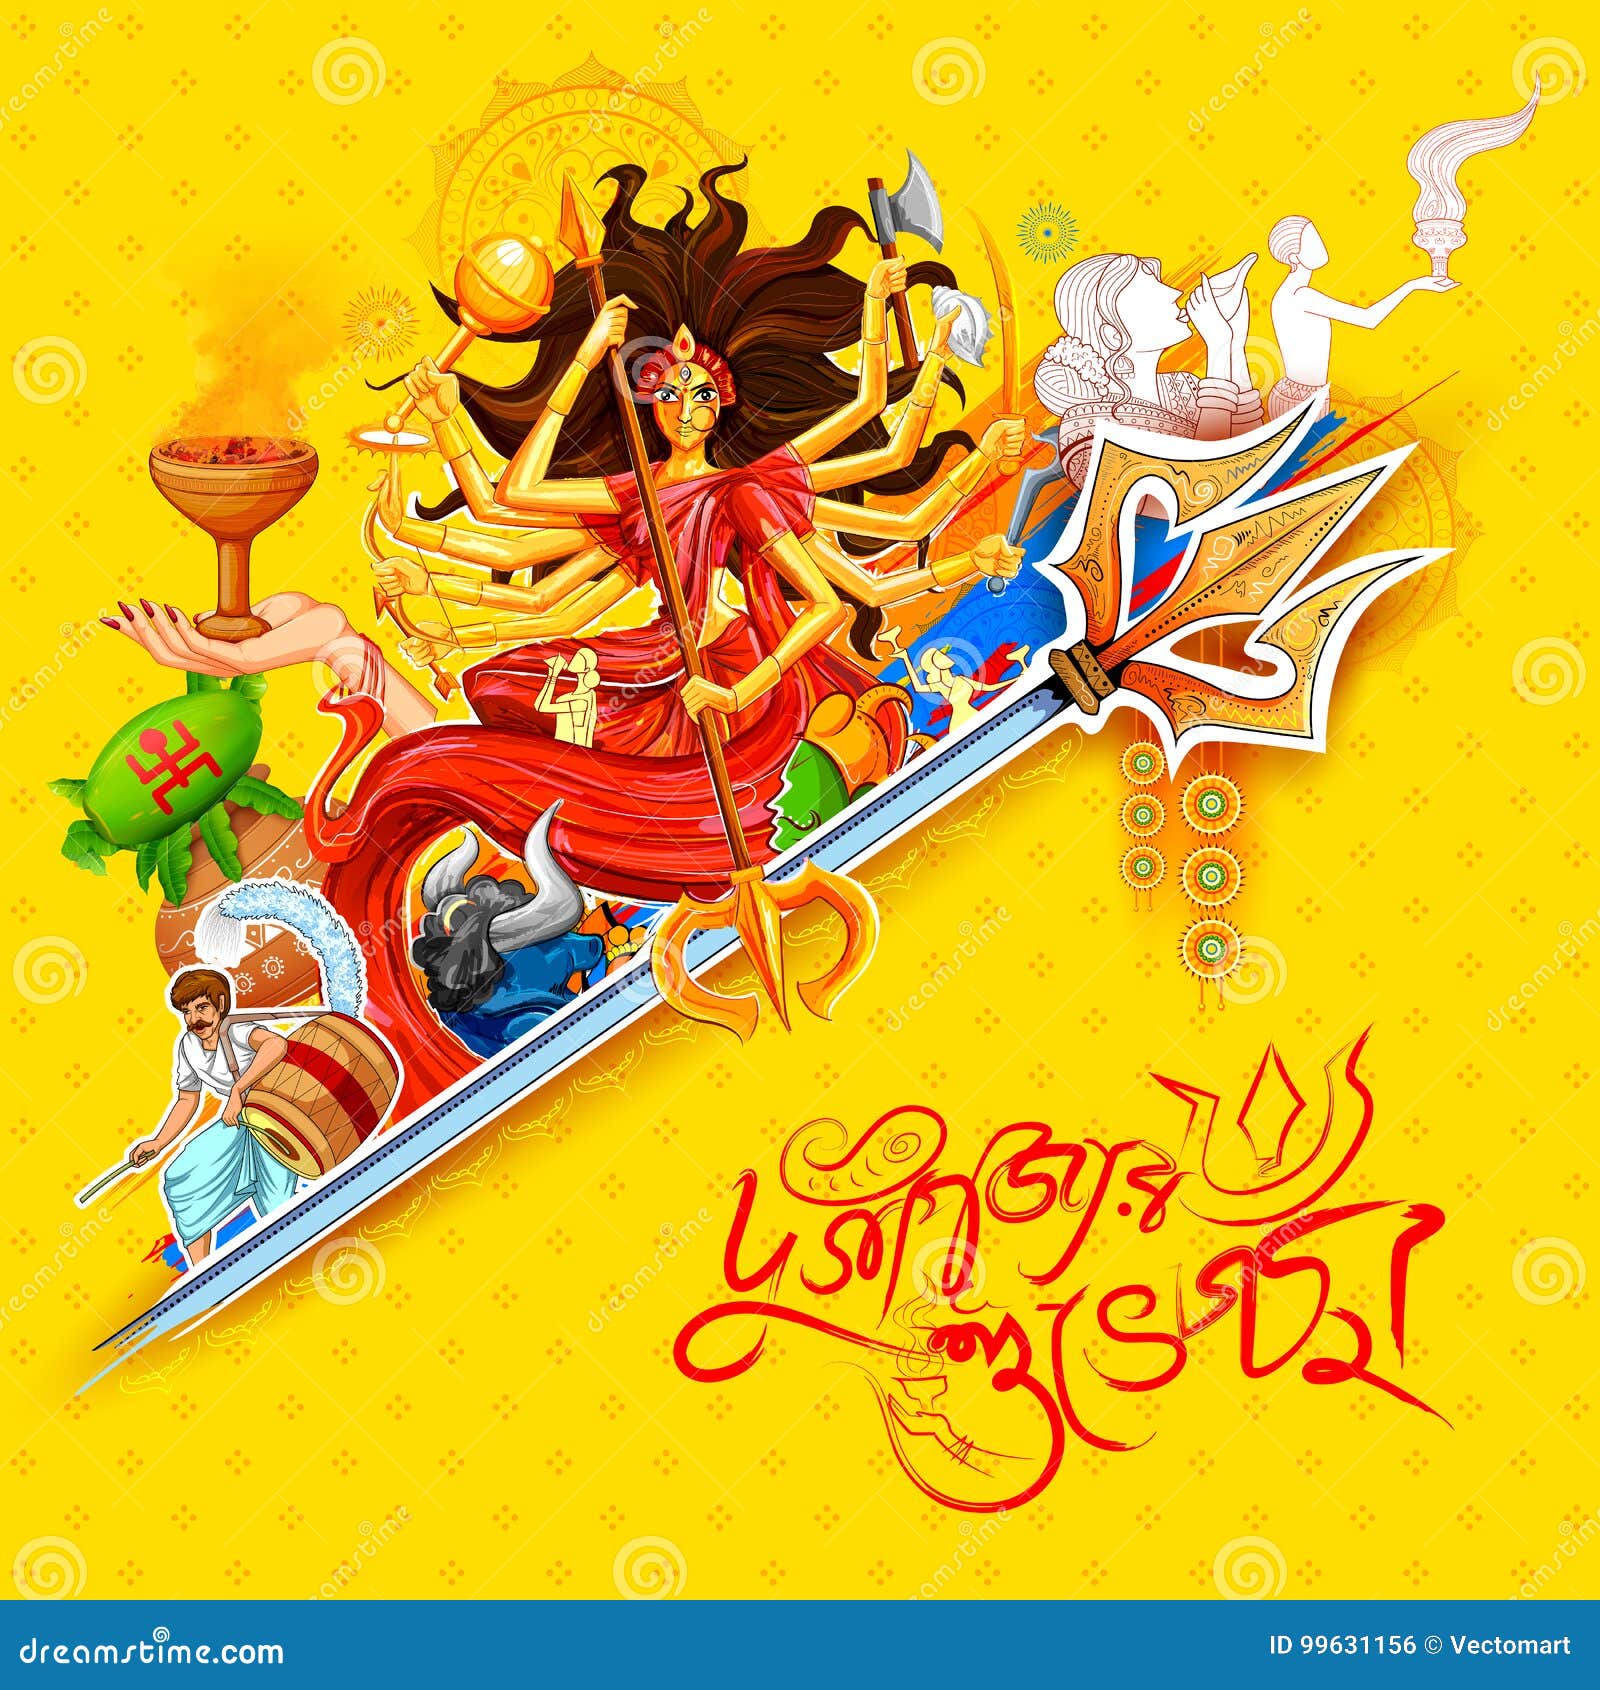 Goddess Durga in Happy Dussehra Background with Bengali Text ...